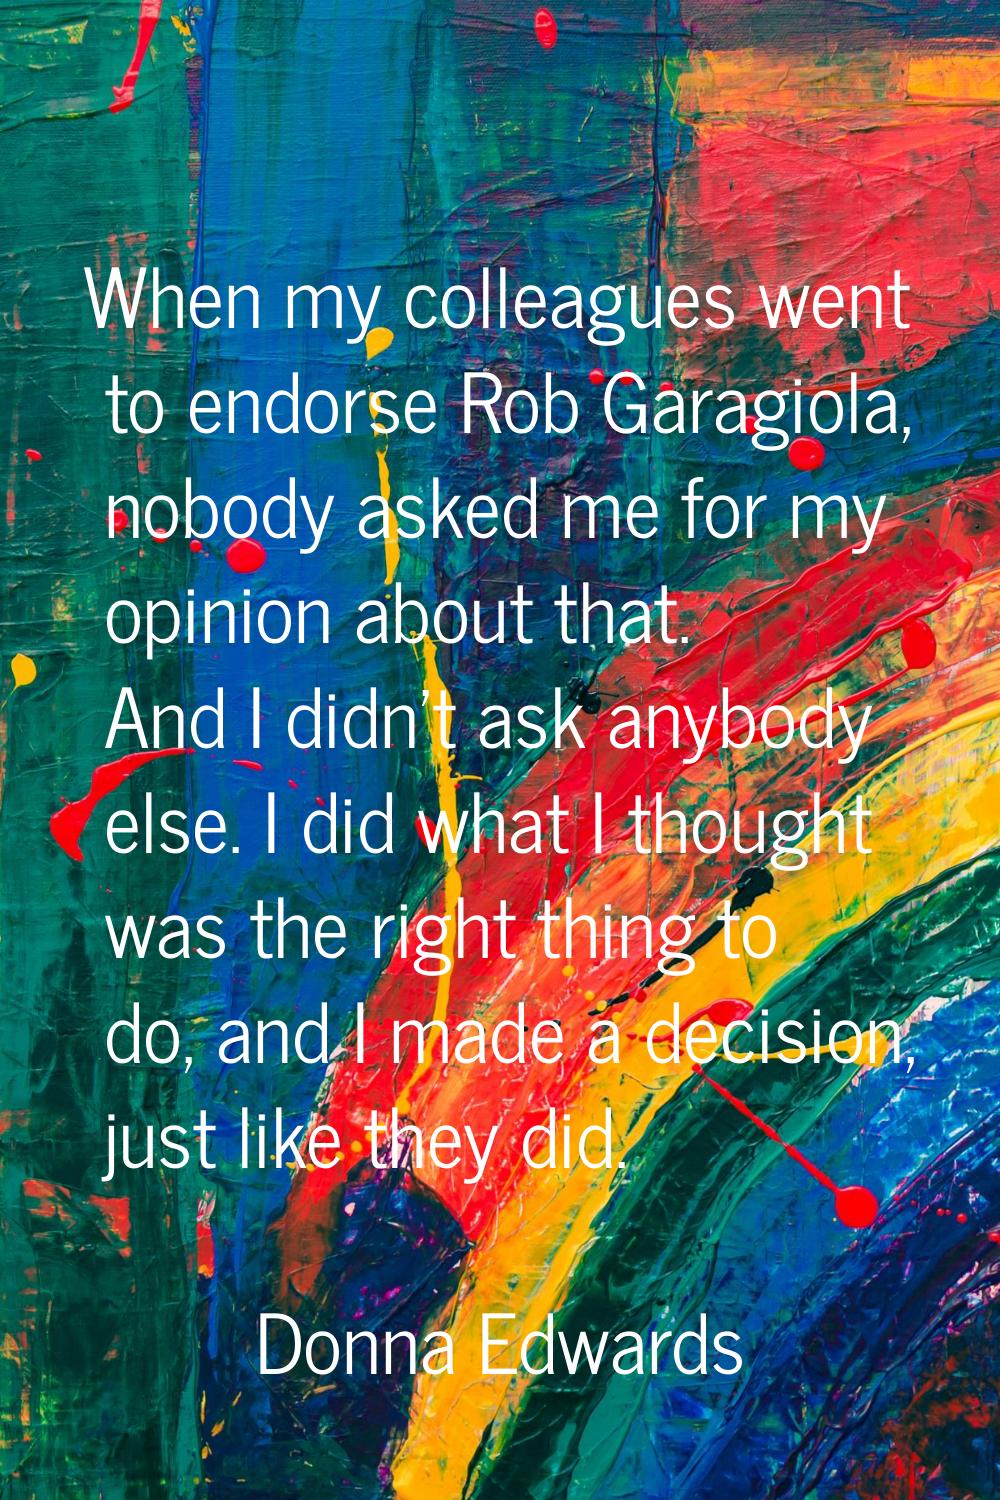 When my colleagues went to endorse Rob Garagiola, nobody asked me for my opinion about that. And I 